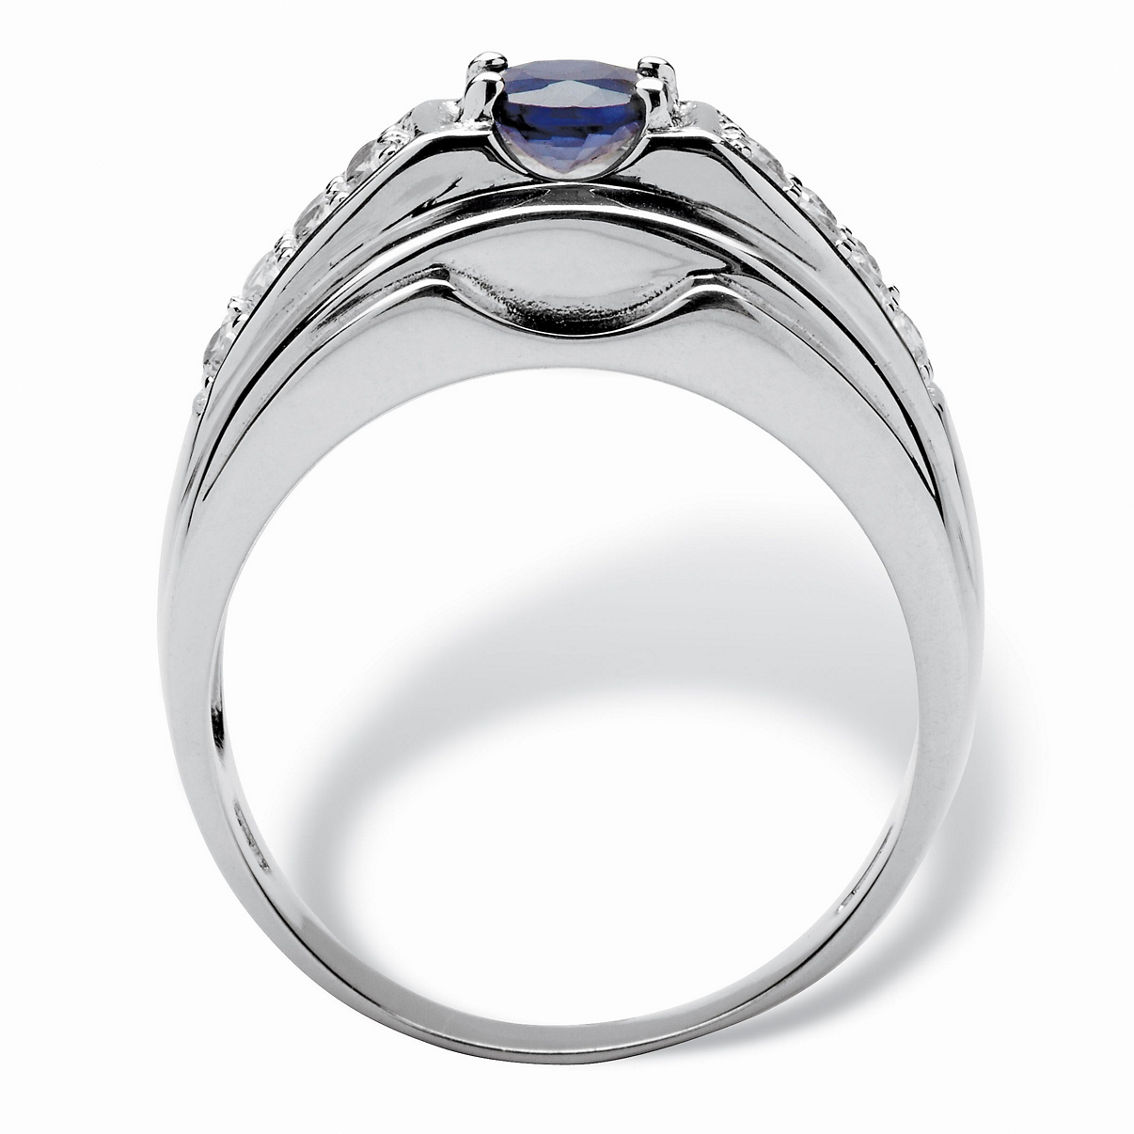 PalmBeach Men's 1.53 TCW Genuine Sapphire and CZ Ring in Sterling Silver - Image 2 of 5